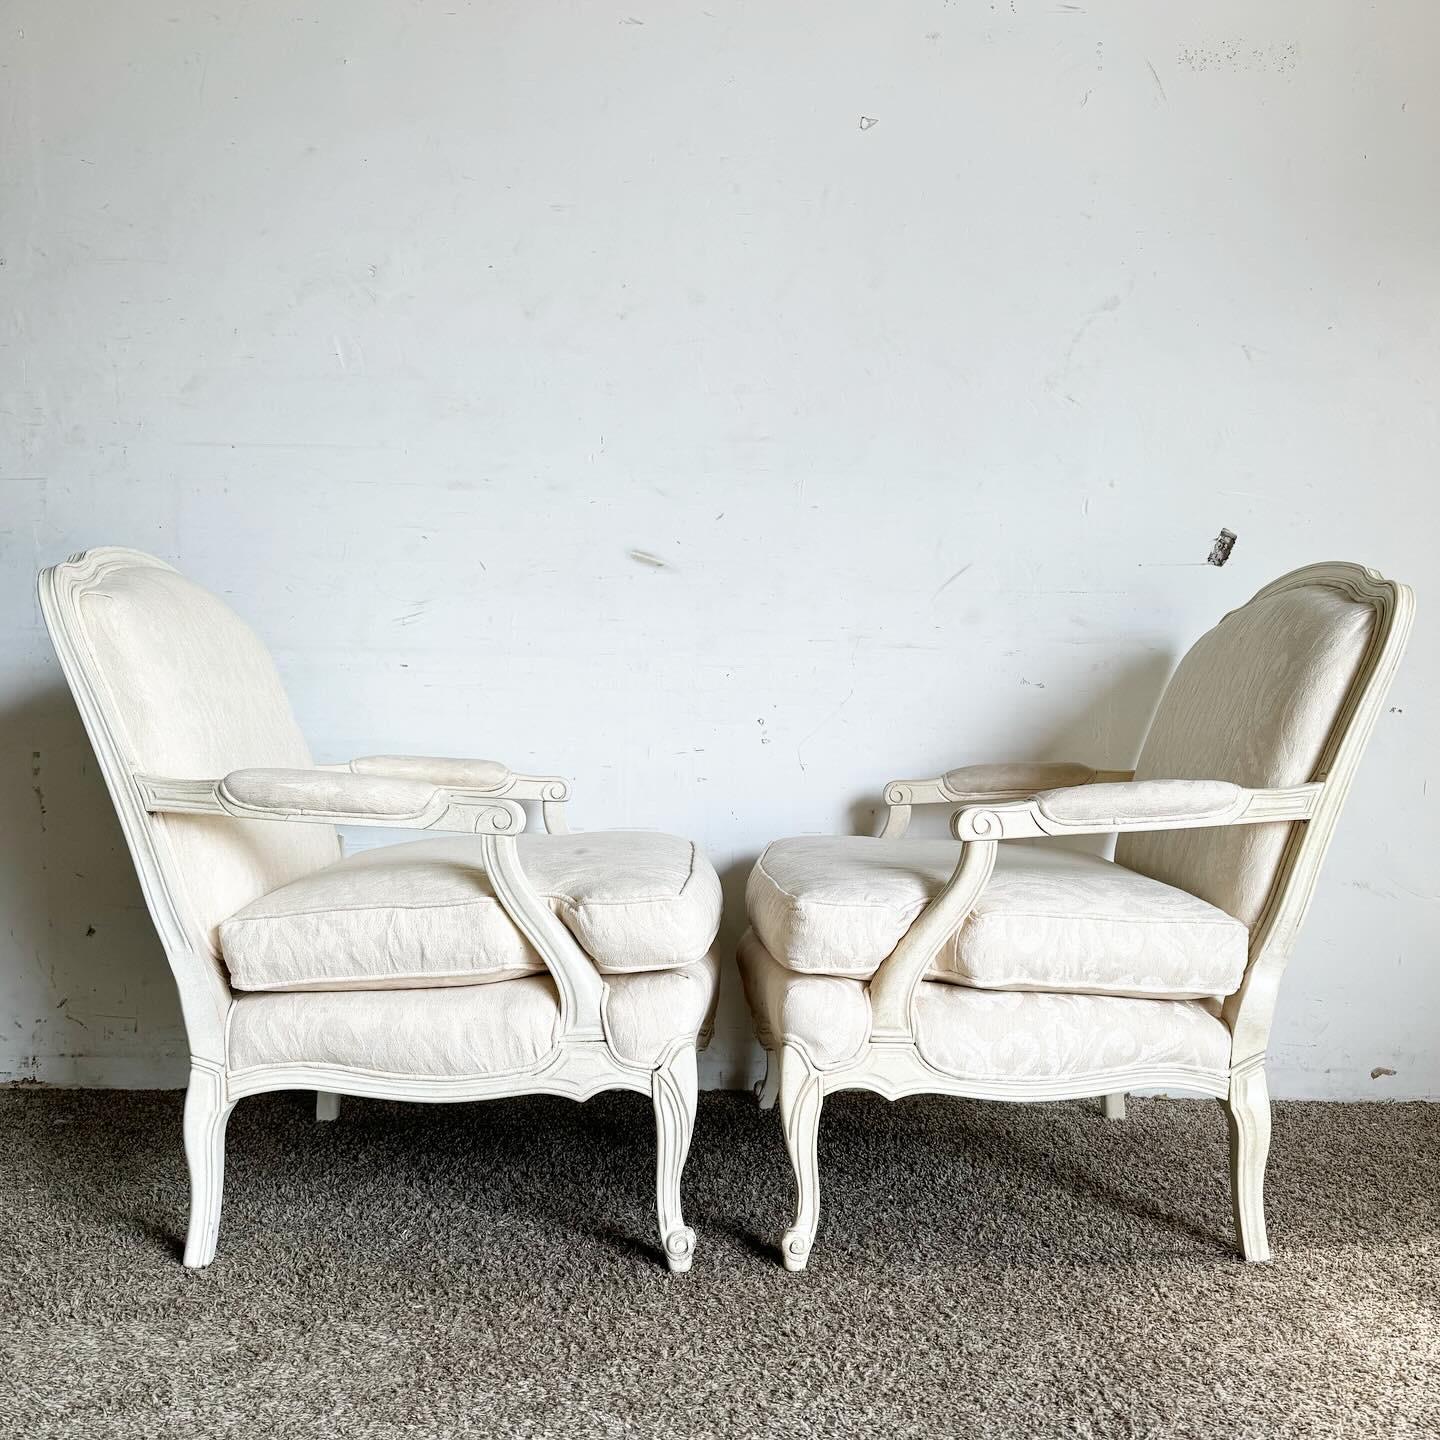 Fabric French Provincial Cream/Off White Arm Chairs - a Pair